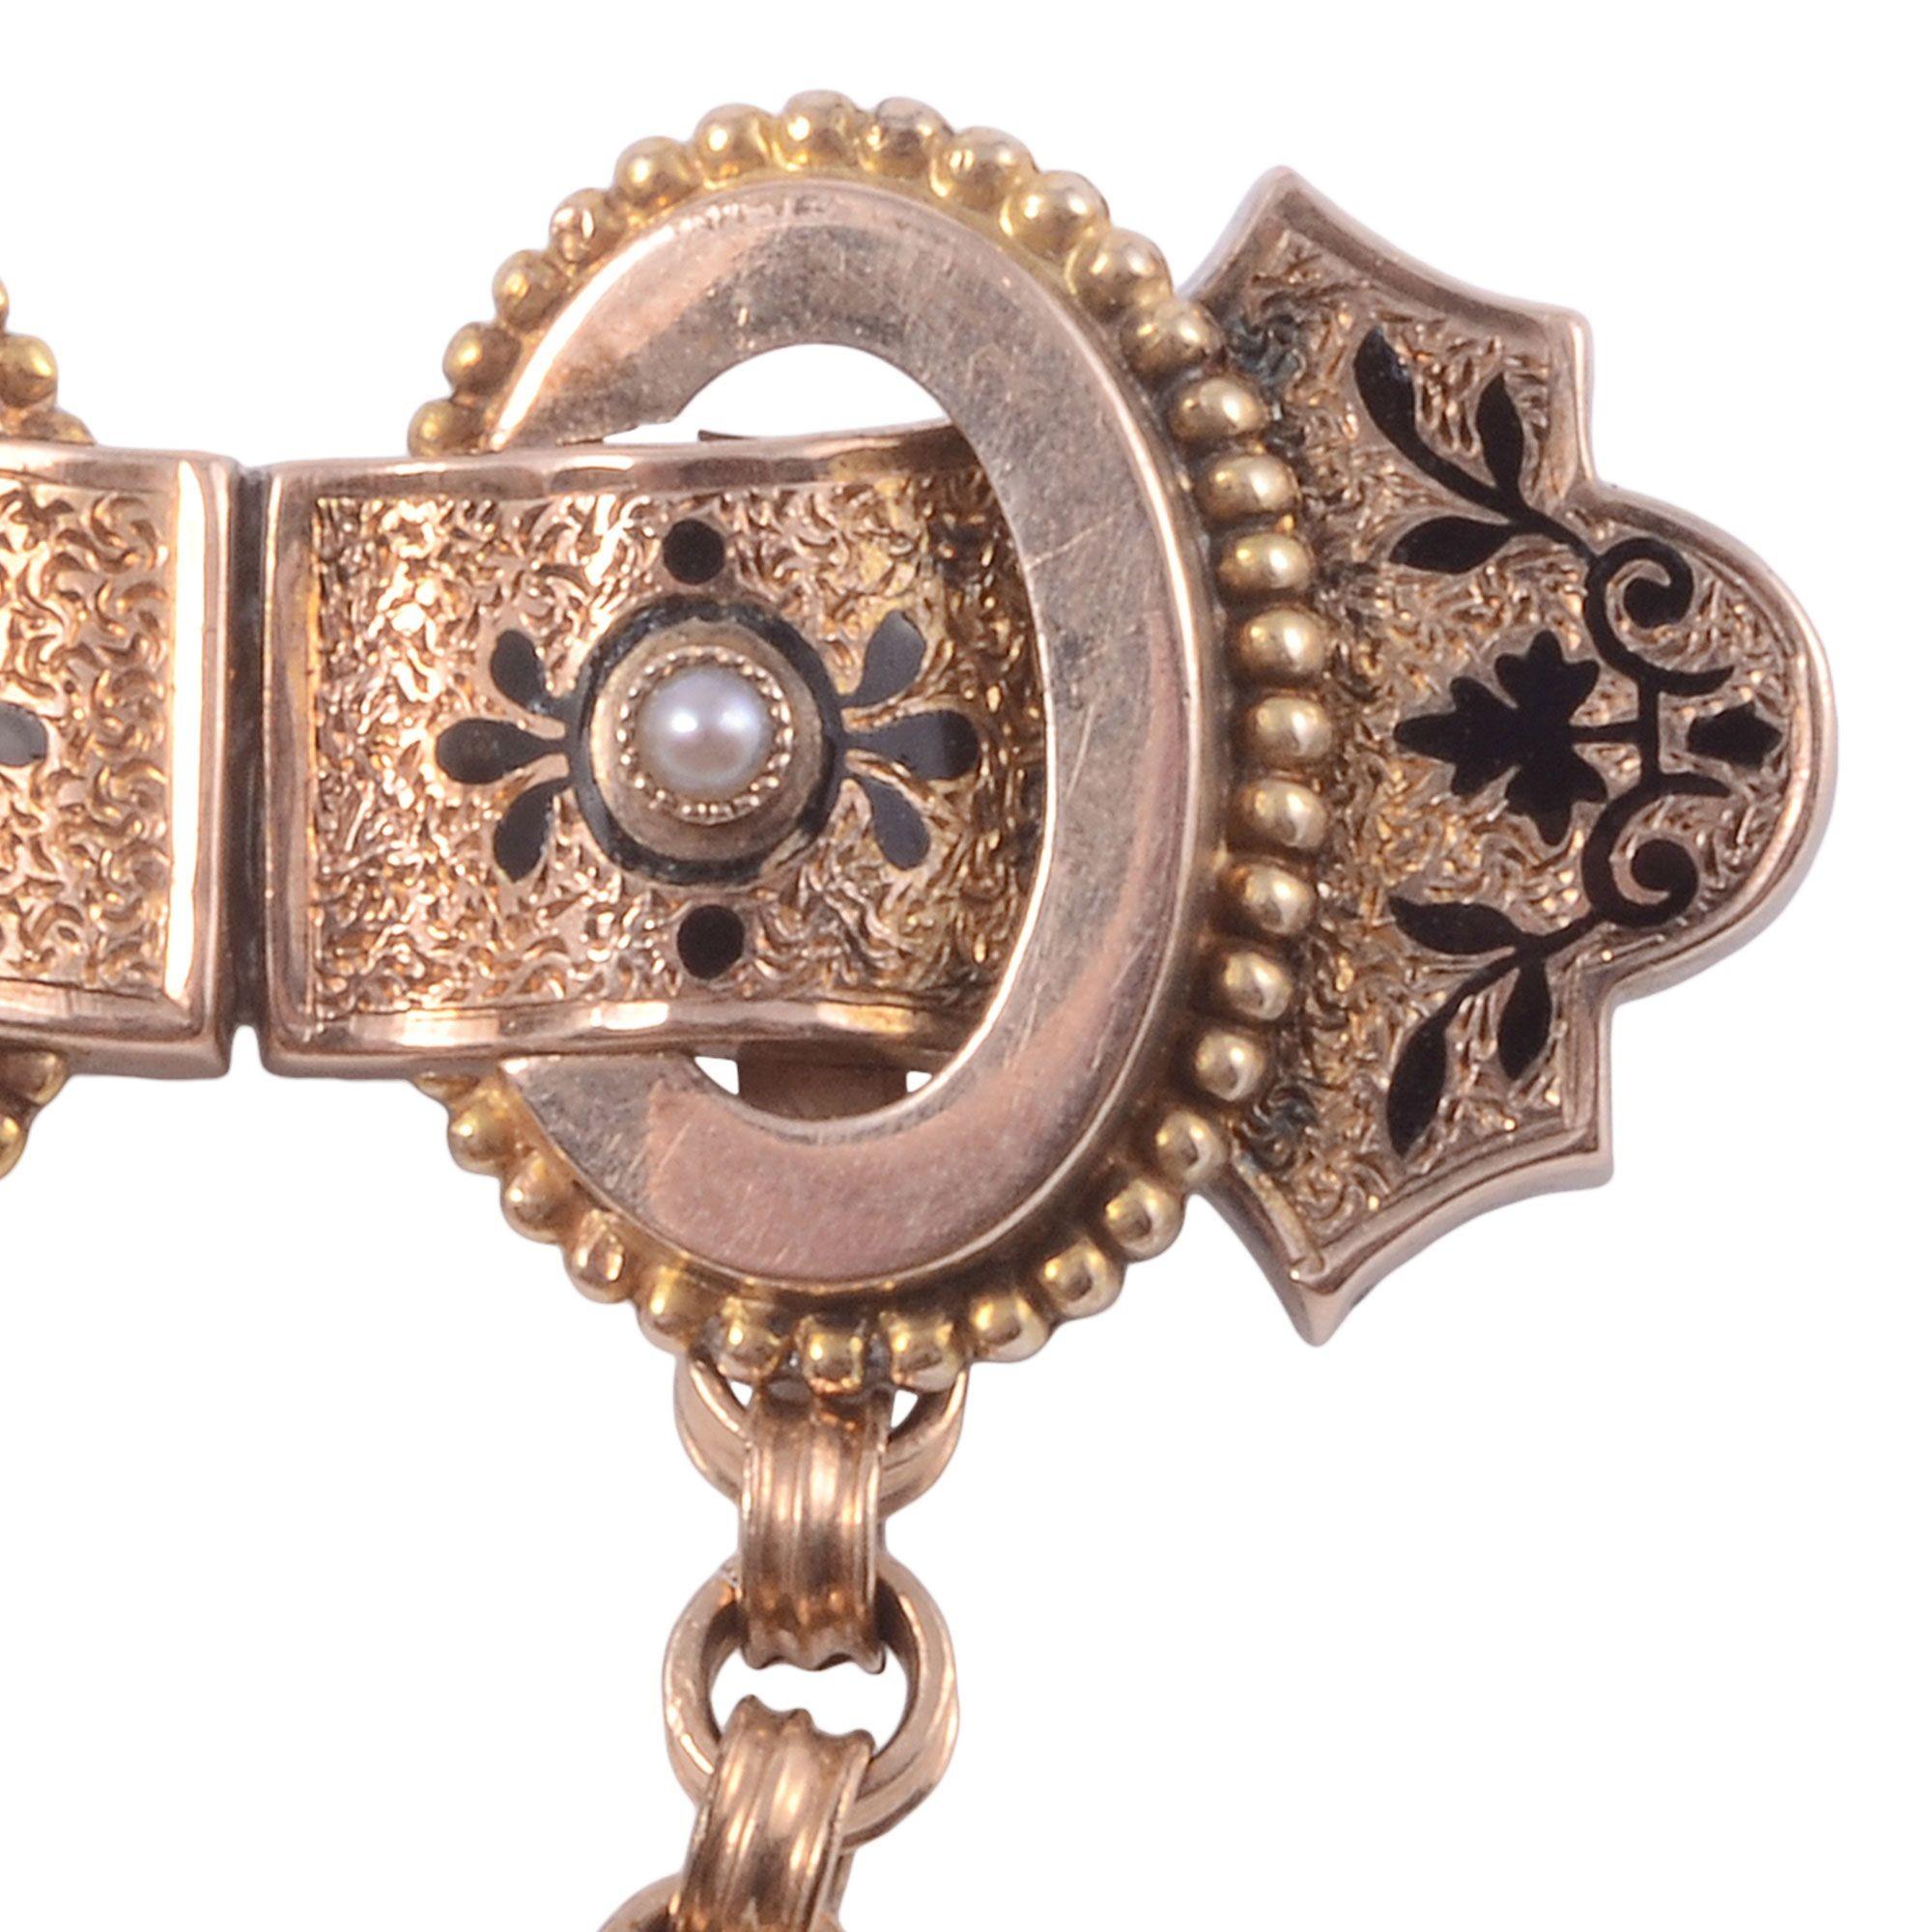 Antique seed pearl enamel pin, circa 1920. This antique pin is crafted in 10 karat yellow gold and features enameling and two seed pearls. This pin has an attached loop chain. [ADTI AOT1765]

Dimensions
1.4″H x 1.5″W